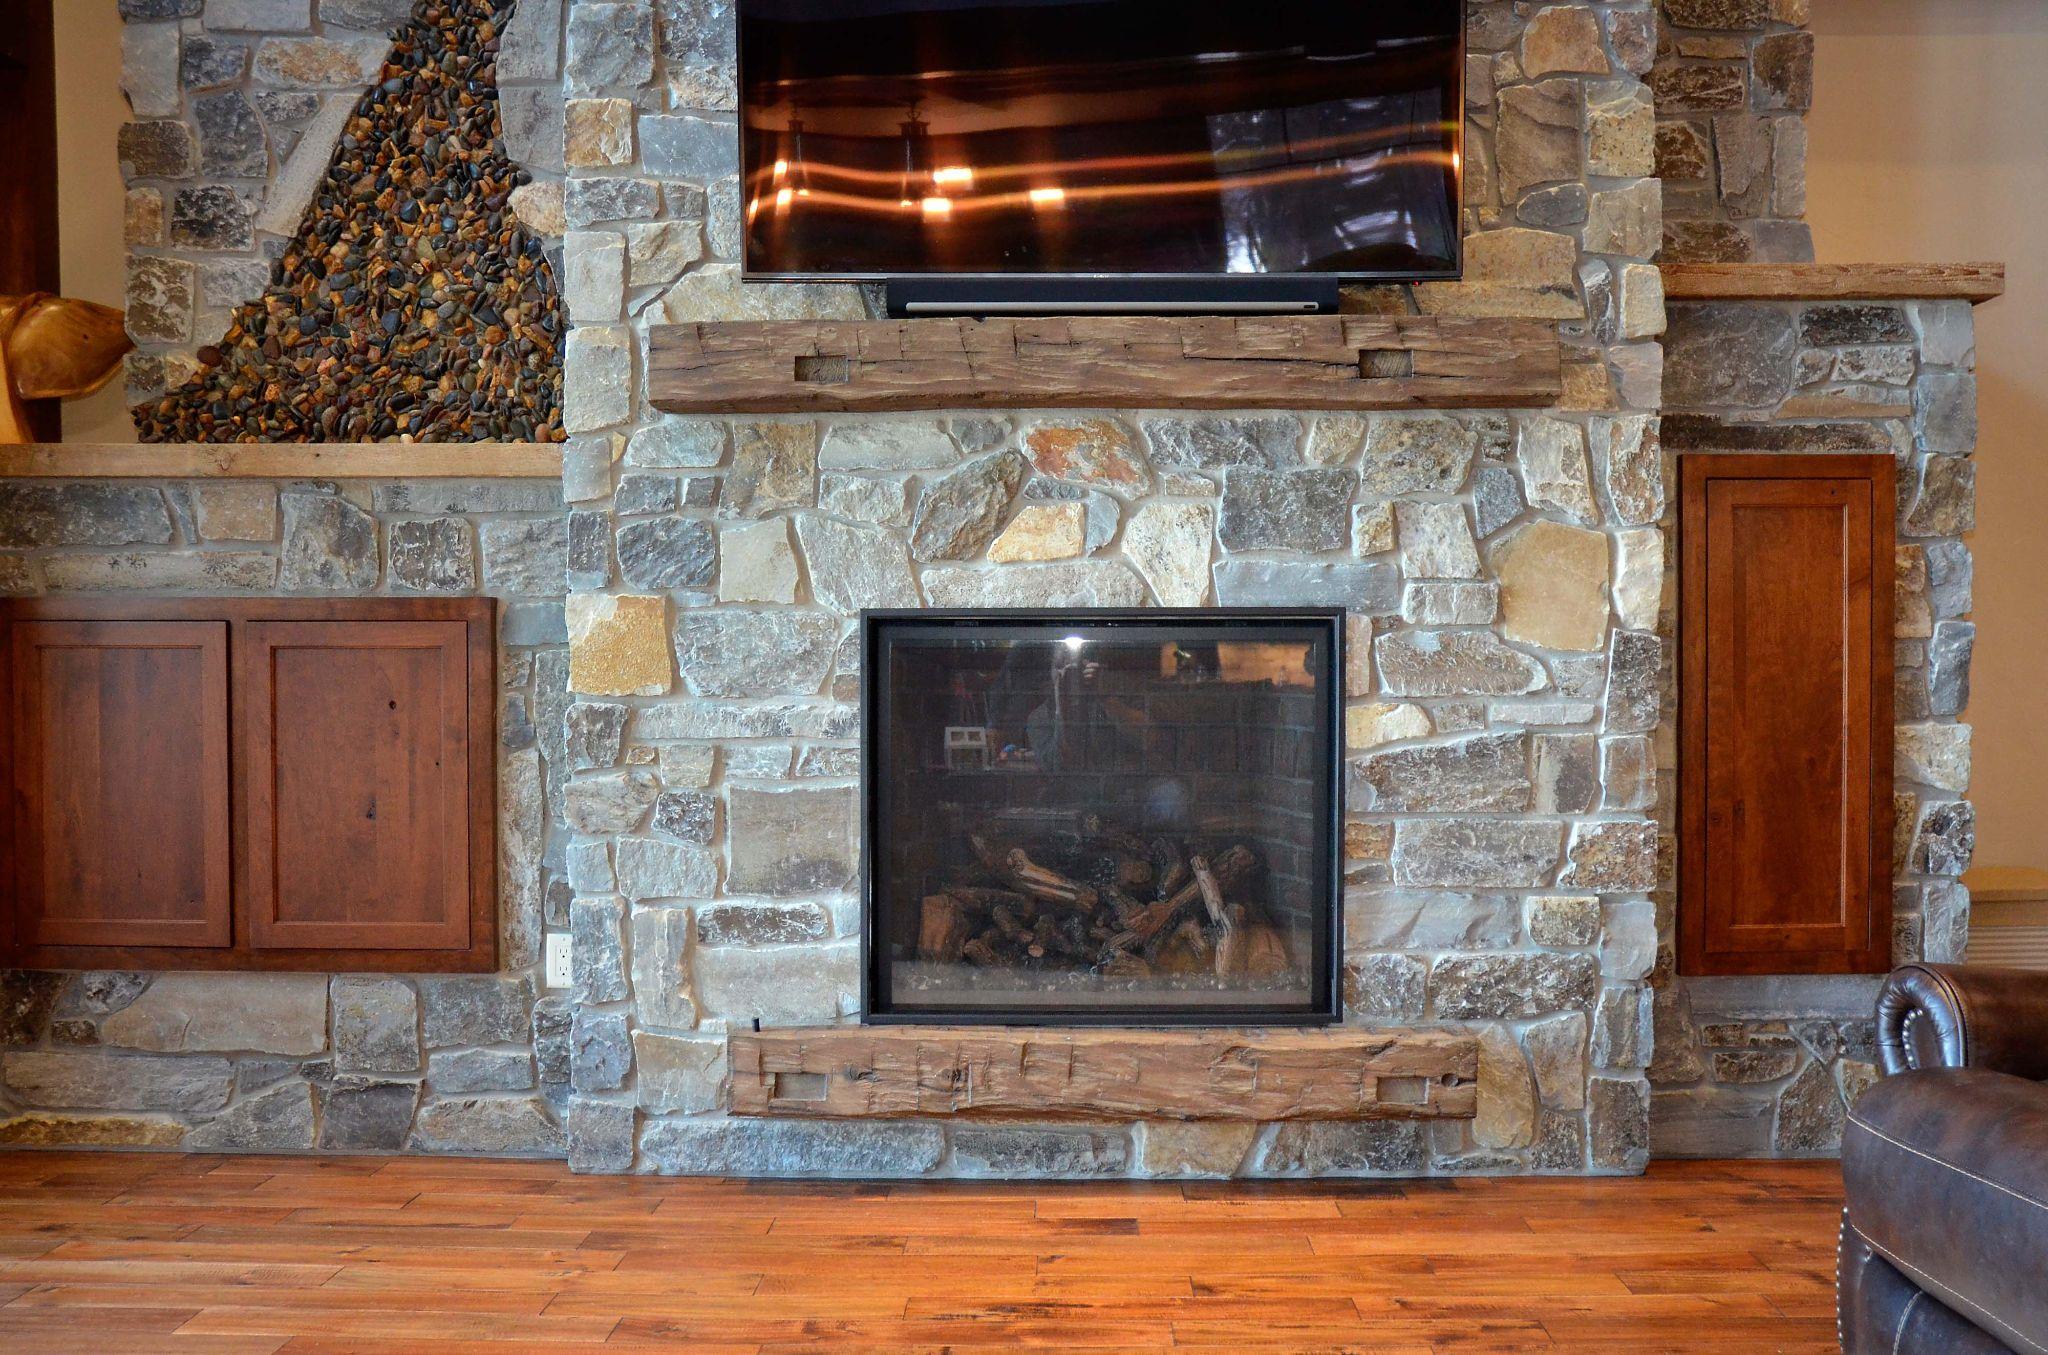 Choosing a Fireplace Mantel: Which Look Is Right for You?